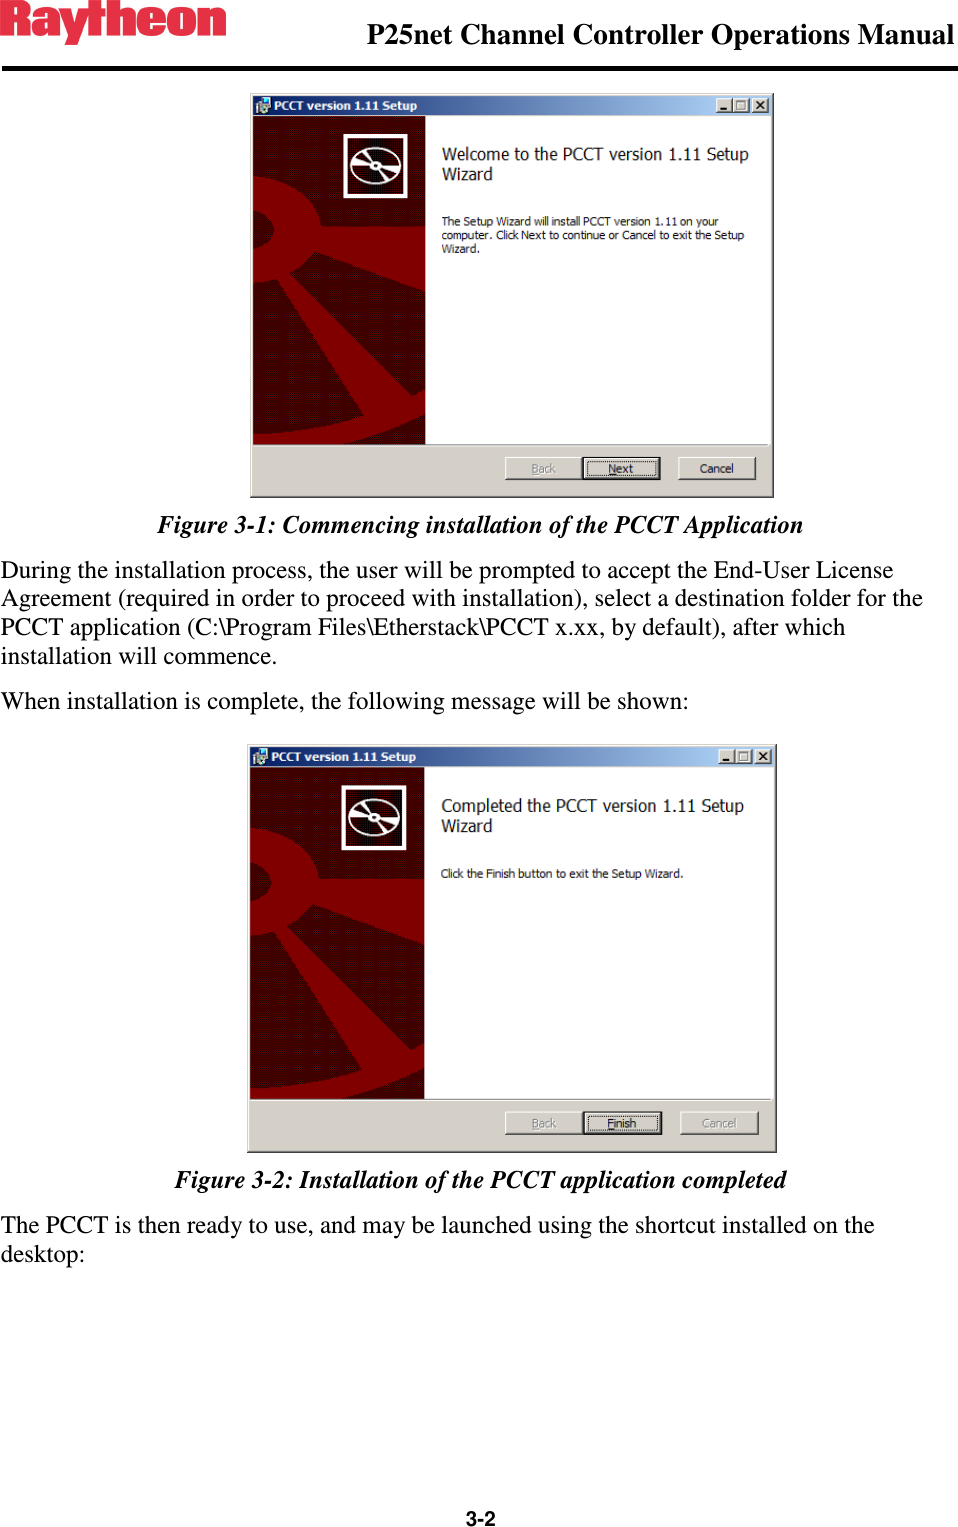                P25net Channel Controller Operations Manual                  3-2   Figure 3-1: Commencing installation of the PCCT Application During the installation process, the user will be prompted to accept the End-User License Agreement (required in order to proceed with installation), select a destination folder for the PCCT application (C:\Program Files\Etherstack\PCCT x.xx, by default), after which installation will commence. When installation is complete, the following message will be shown:  Figure 3-2: Installation of the PCCT application completed The PCCT is then ready to use, and may be launched using the shortcut installed on the desktop: 